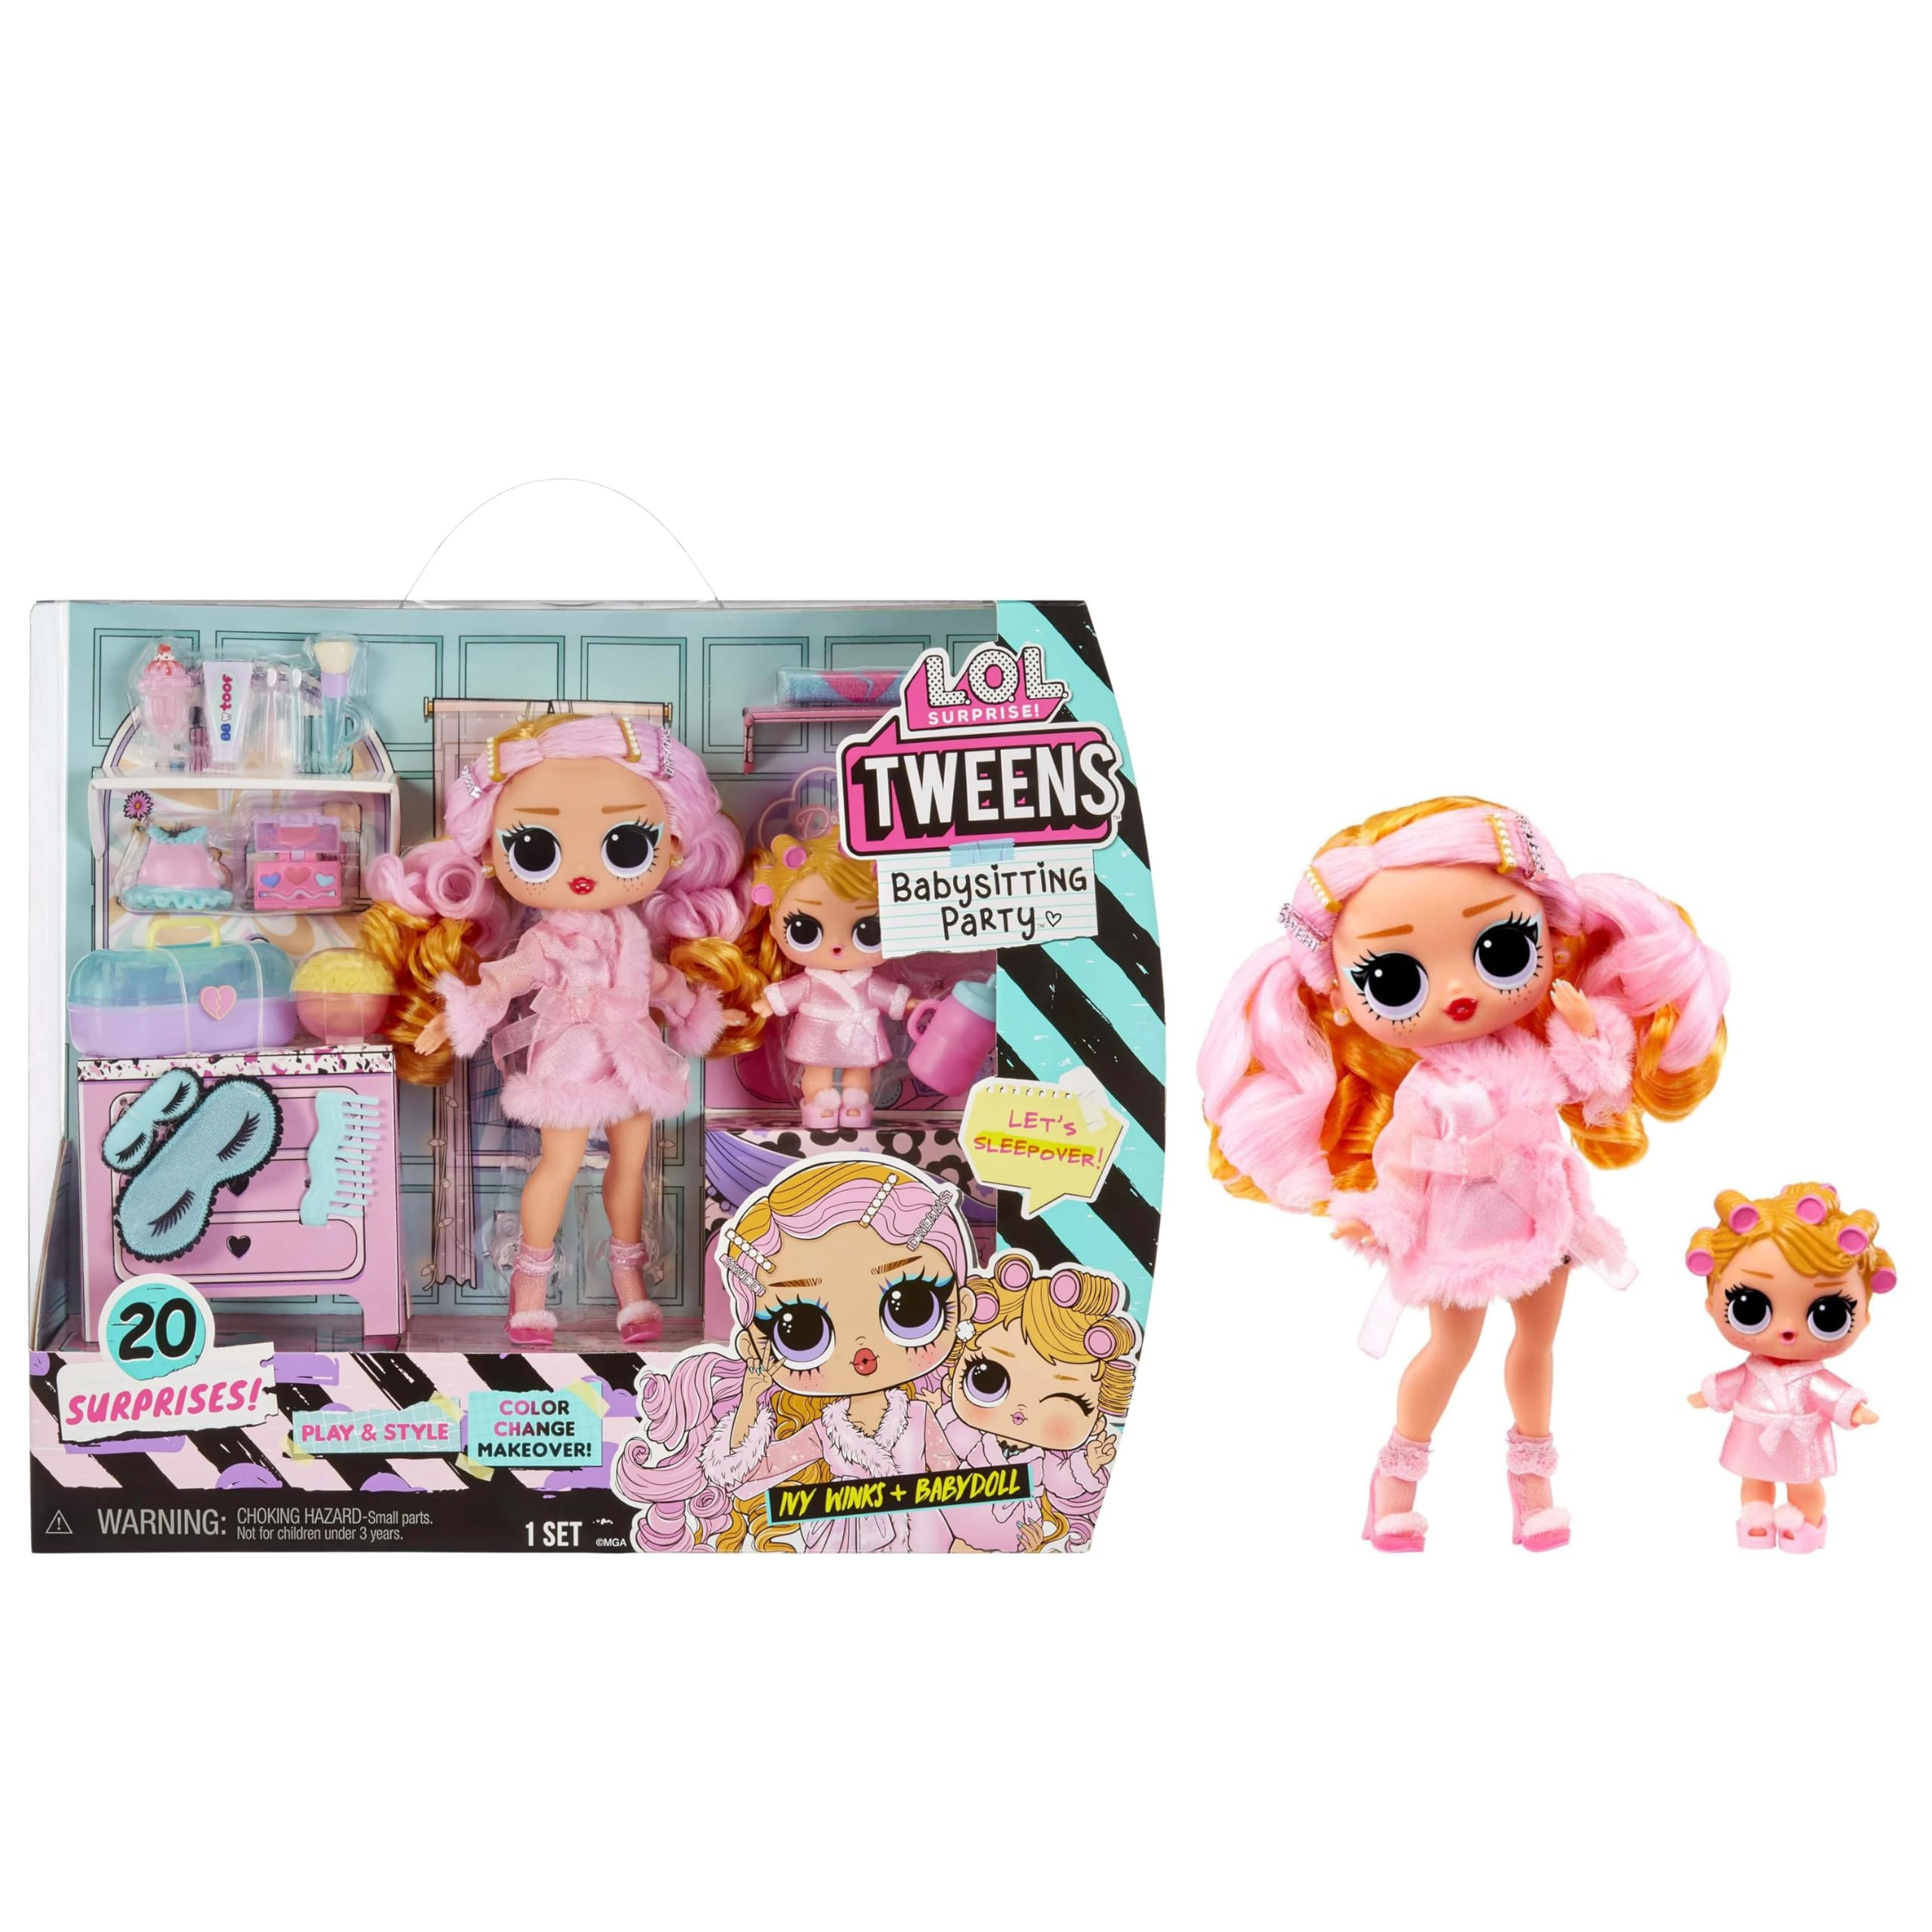 L.O.L. Surprise Tweens Babysitting Sleepover Party (2 Dolls) with 20 Surprises- 1 Fashion Doll & 1 Collectible Doll, Holiday Toy Playset, Great Gift for Kids Ages 4